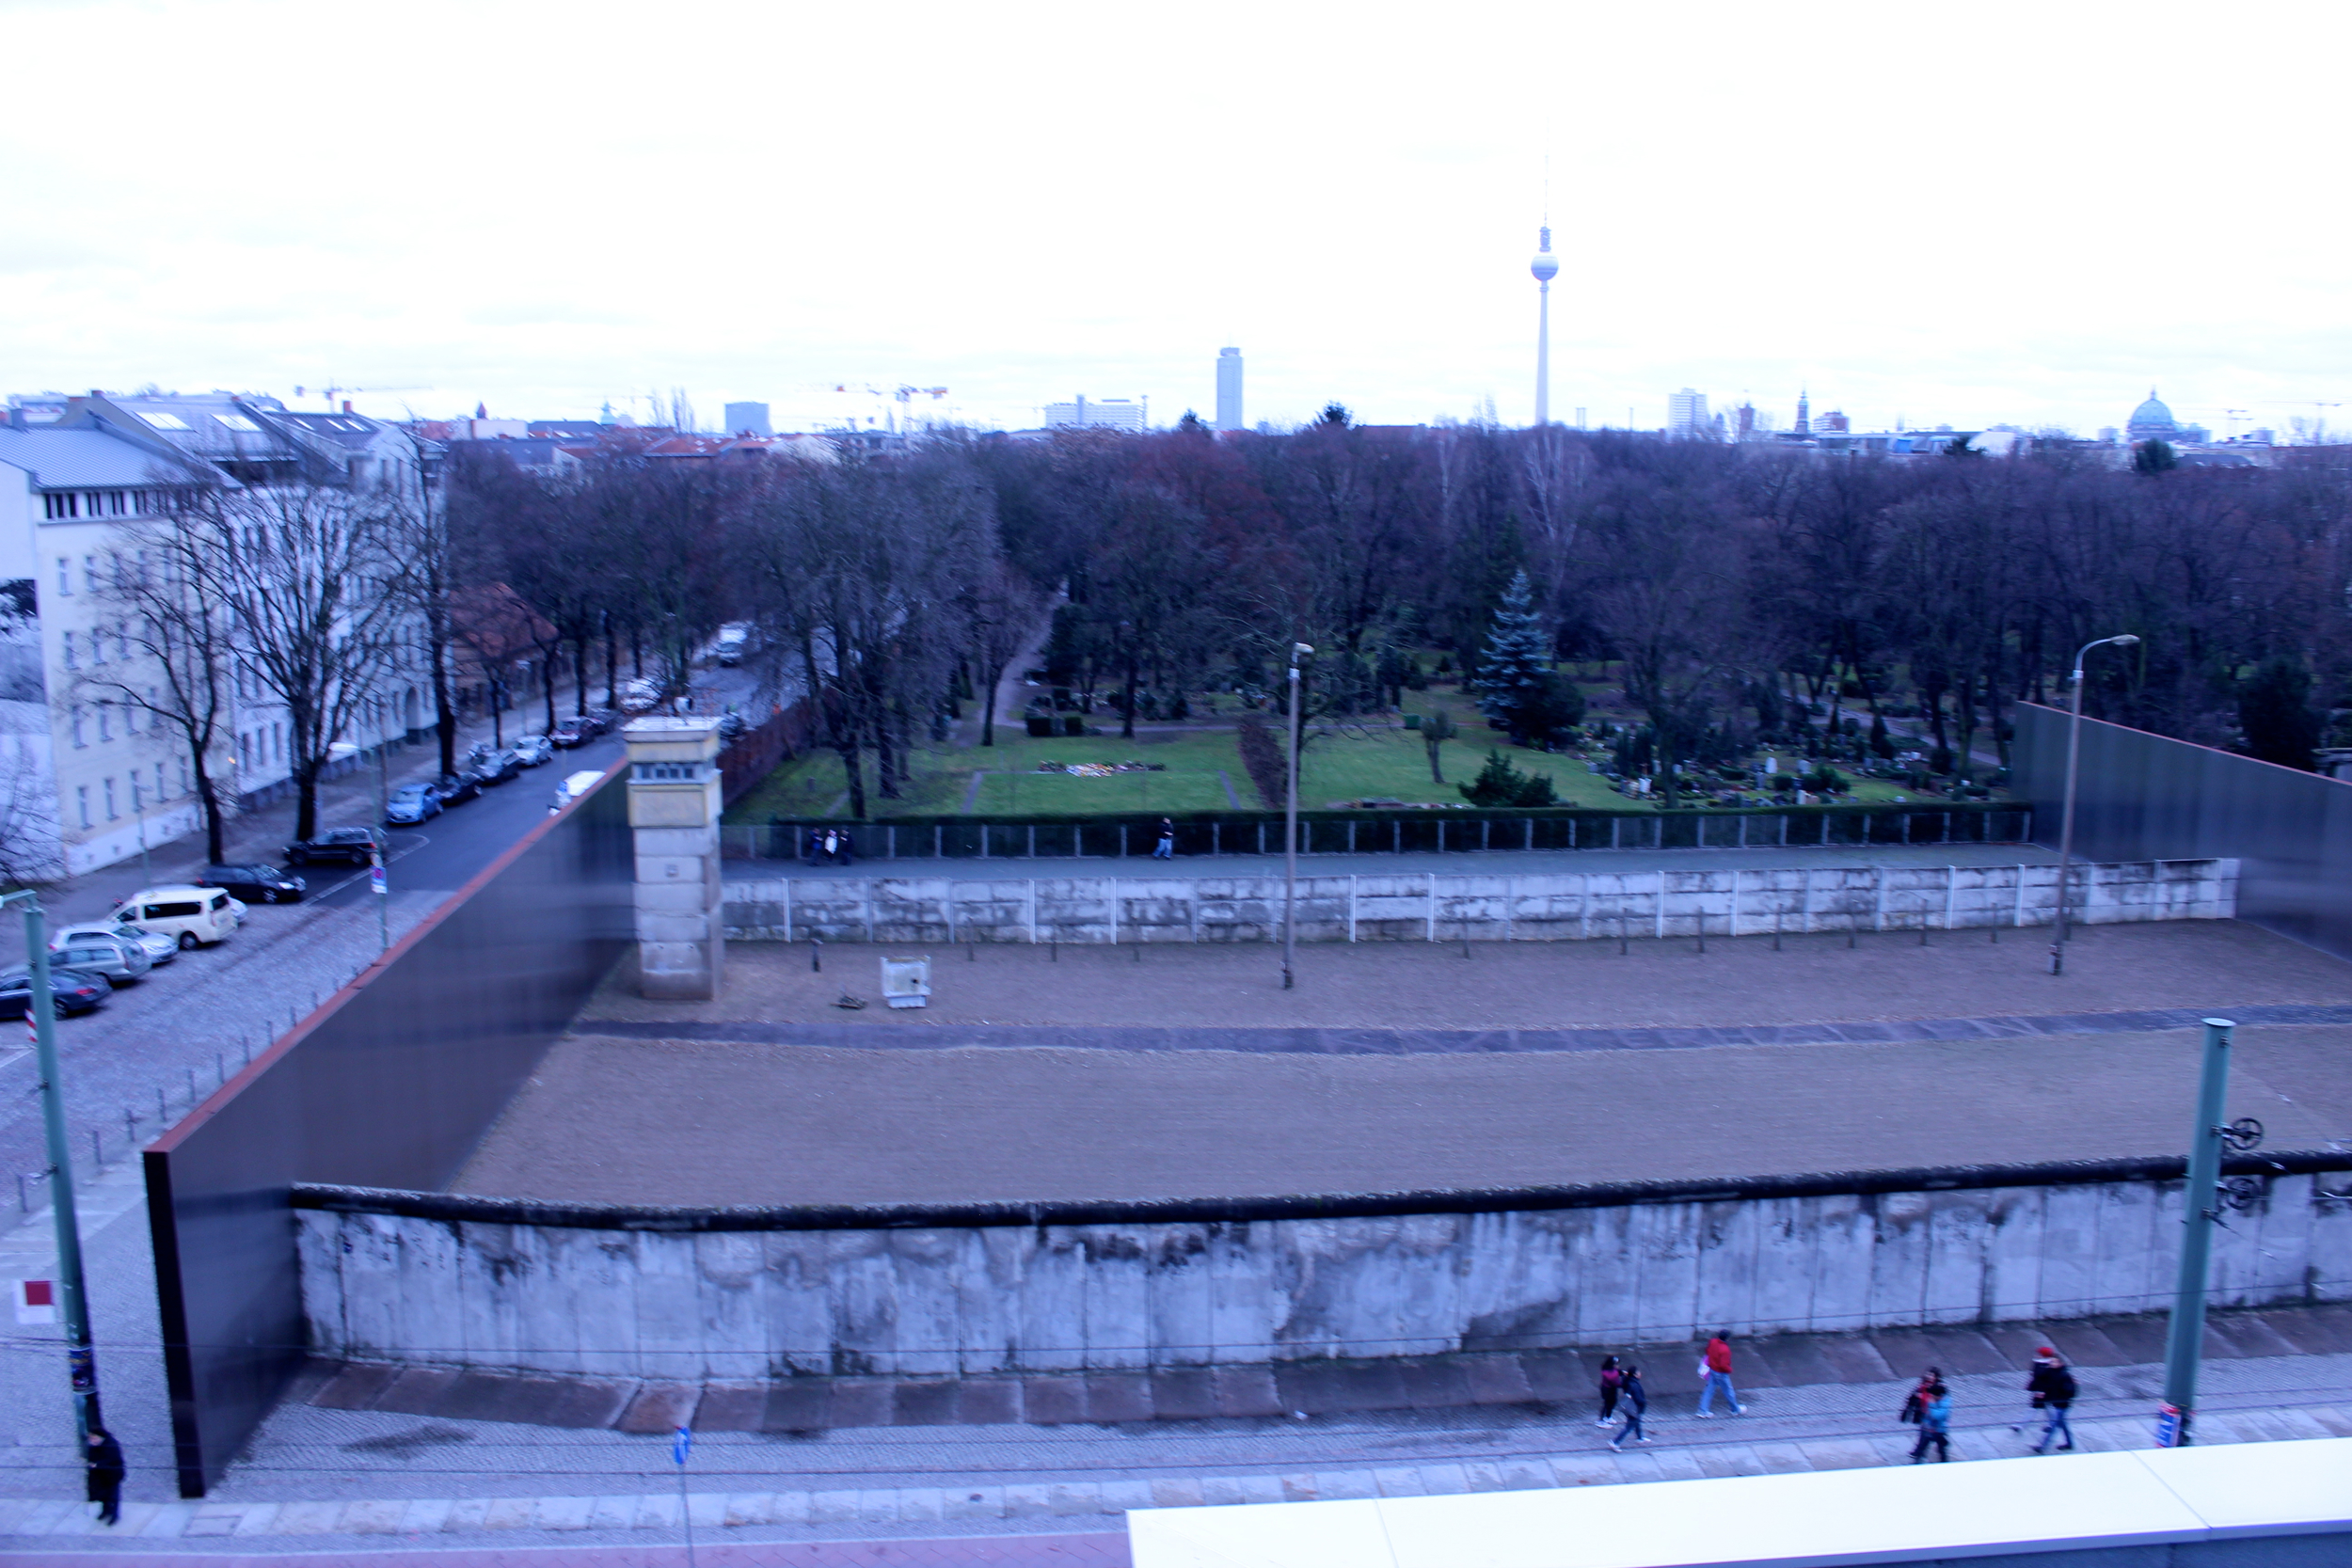 The "death zone" - part of the wall remaining separating East and West Germany